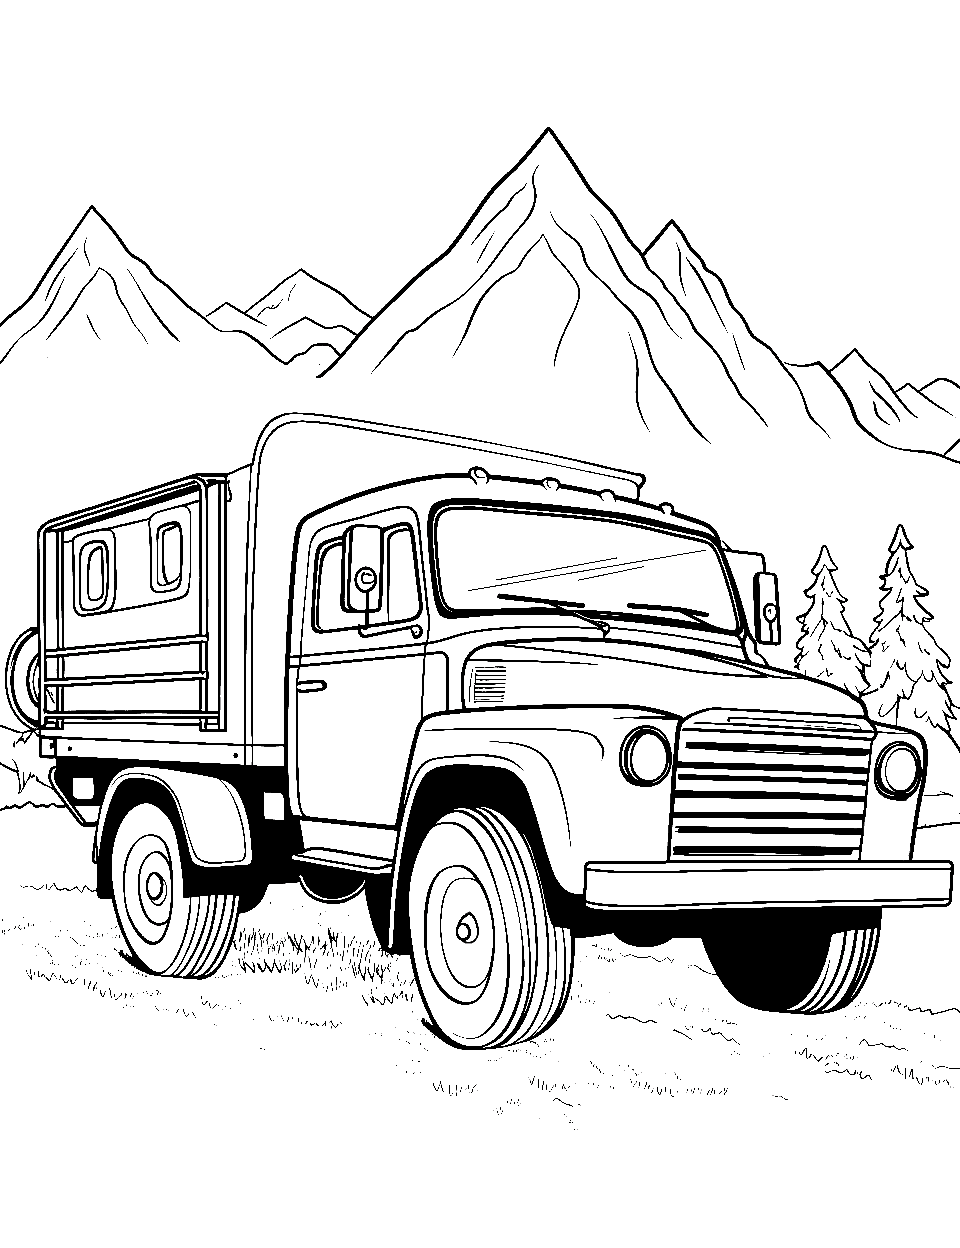 Majestic Mountain View Coloring Page - An off-road truck parked with a picturesque, simple mountain in the background.